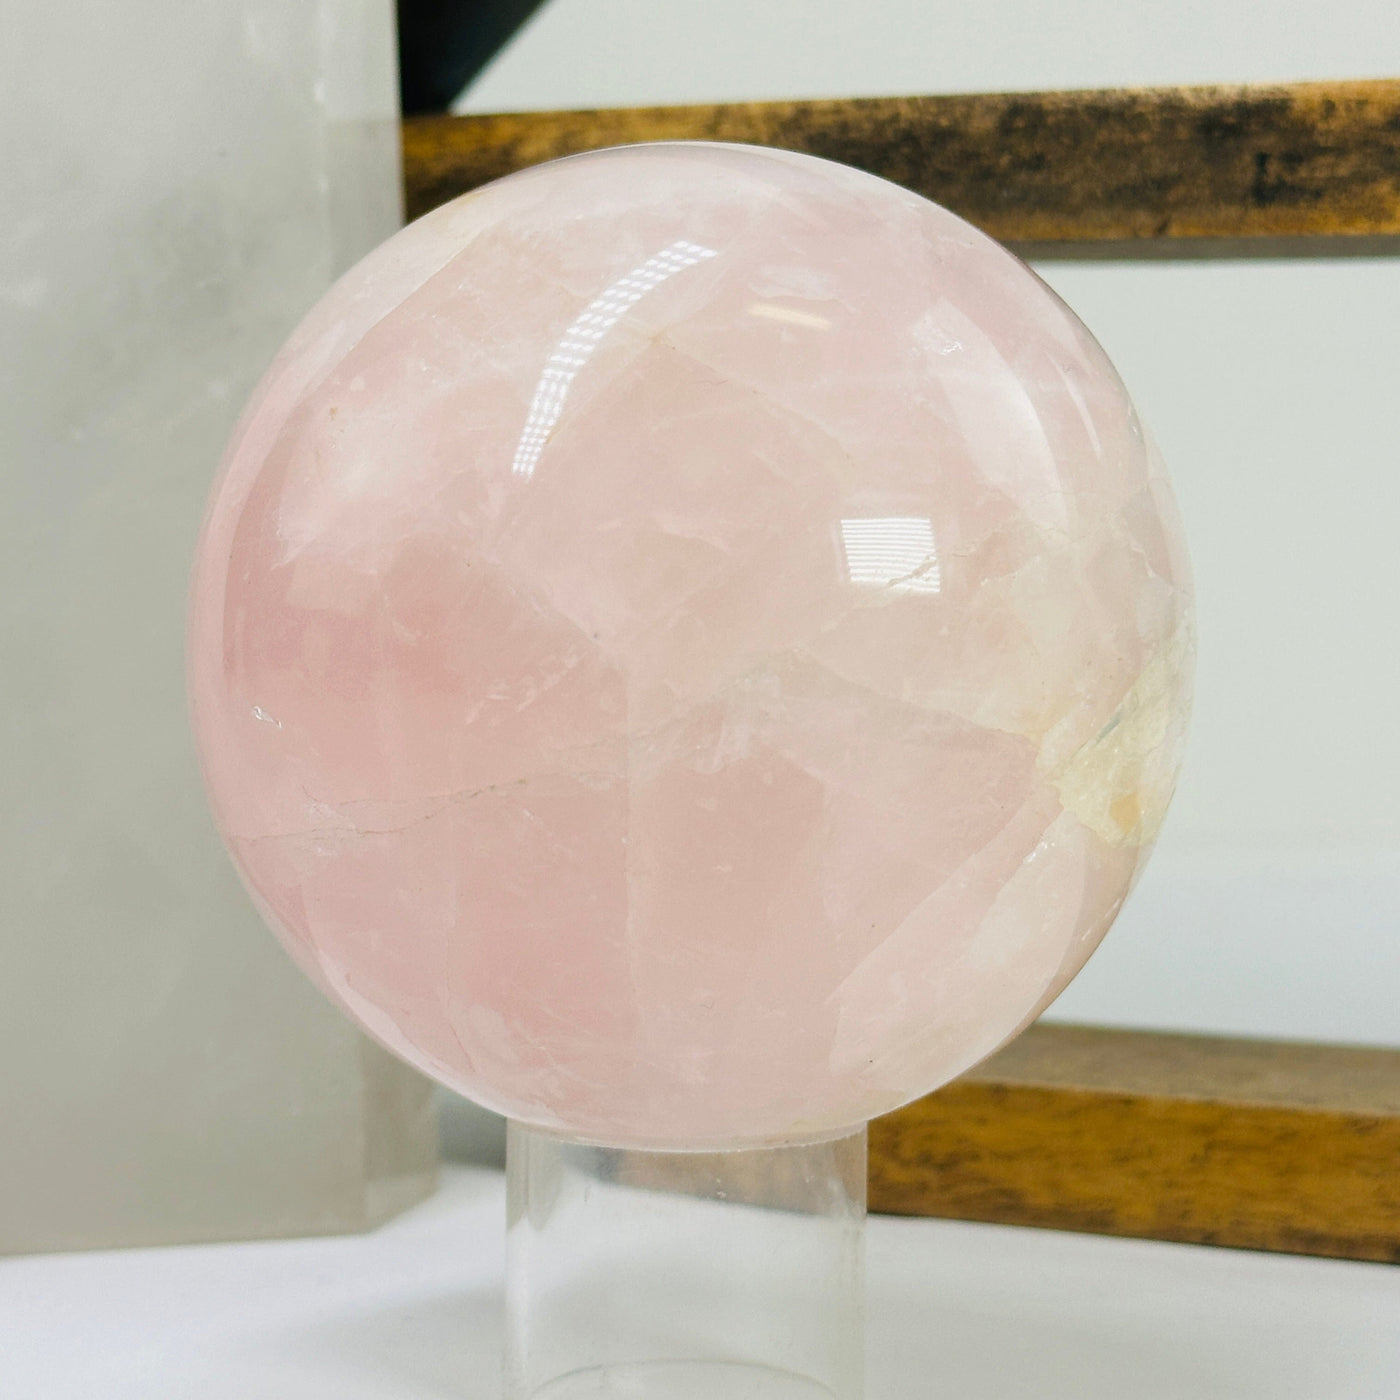 rose quartz sphere with decorations in the background